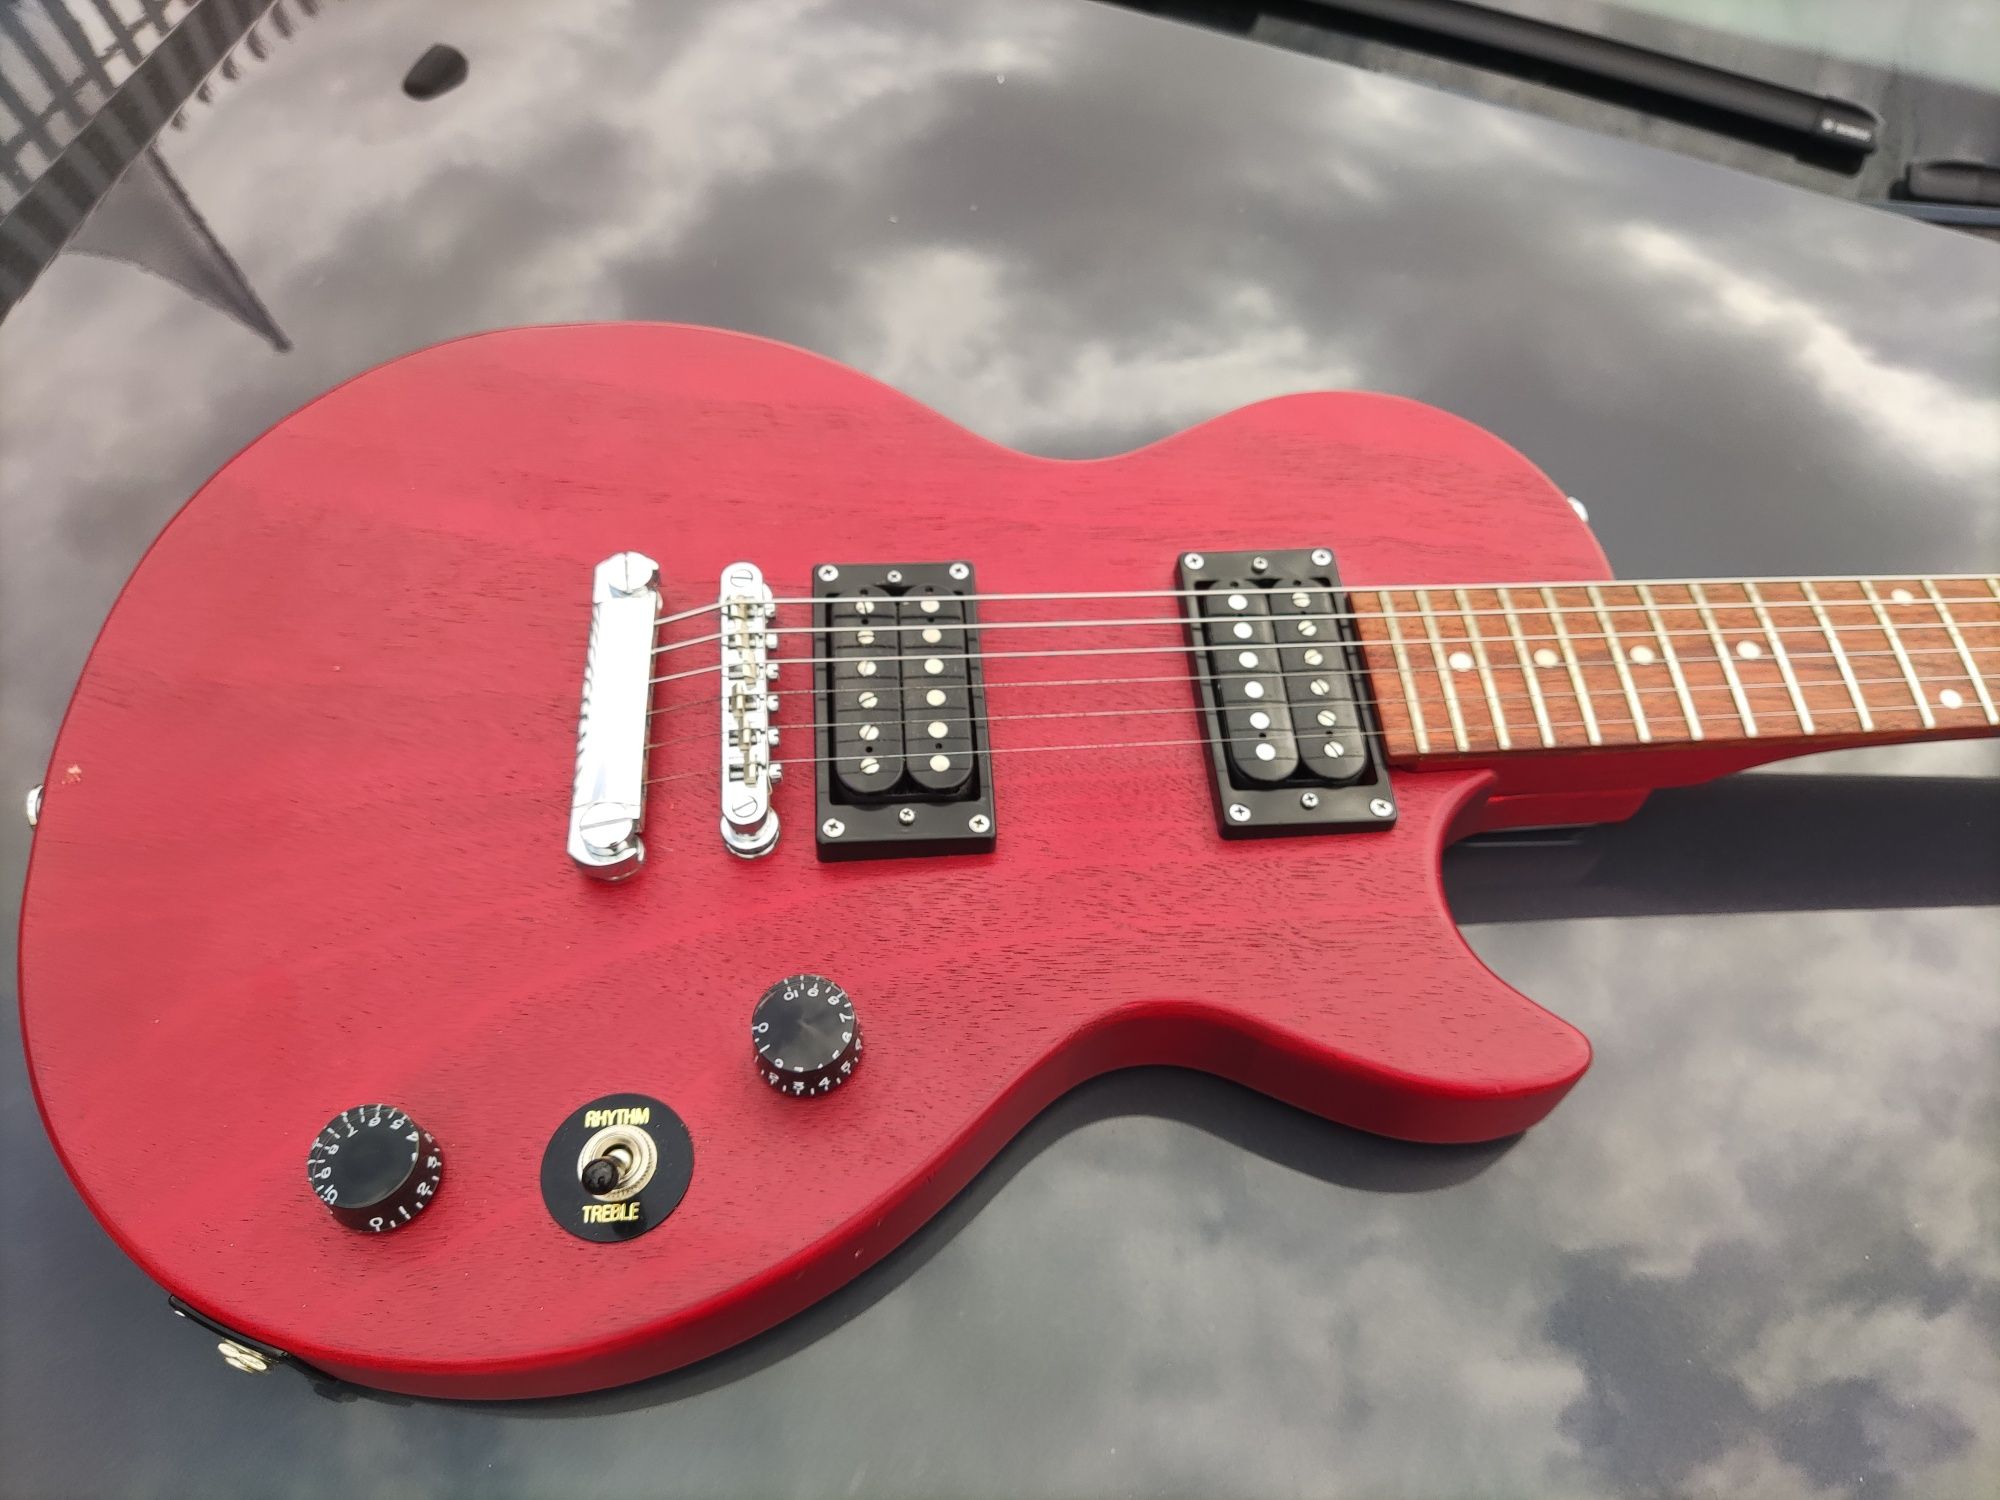 Epiphone Les Paul Special Vintage Satin Cherry red